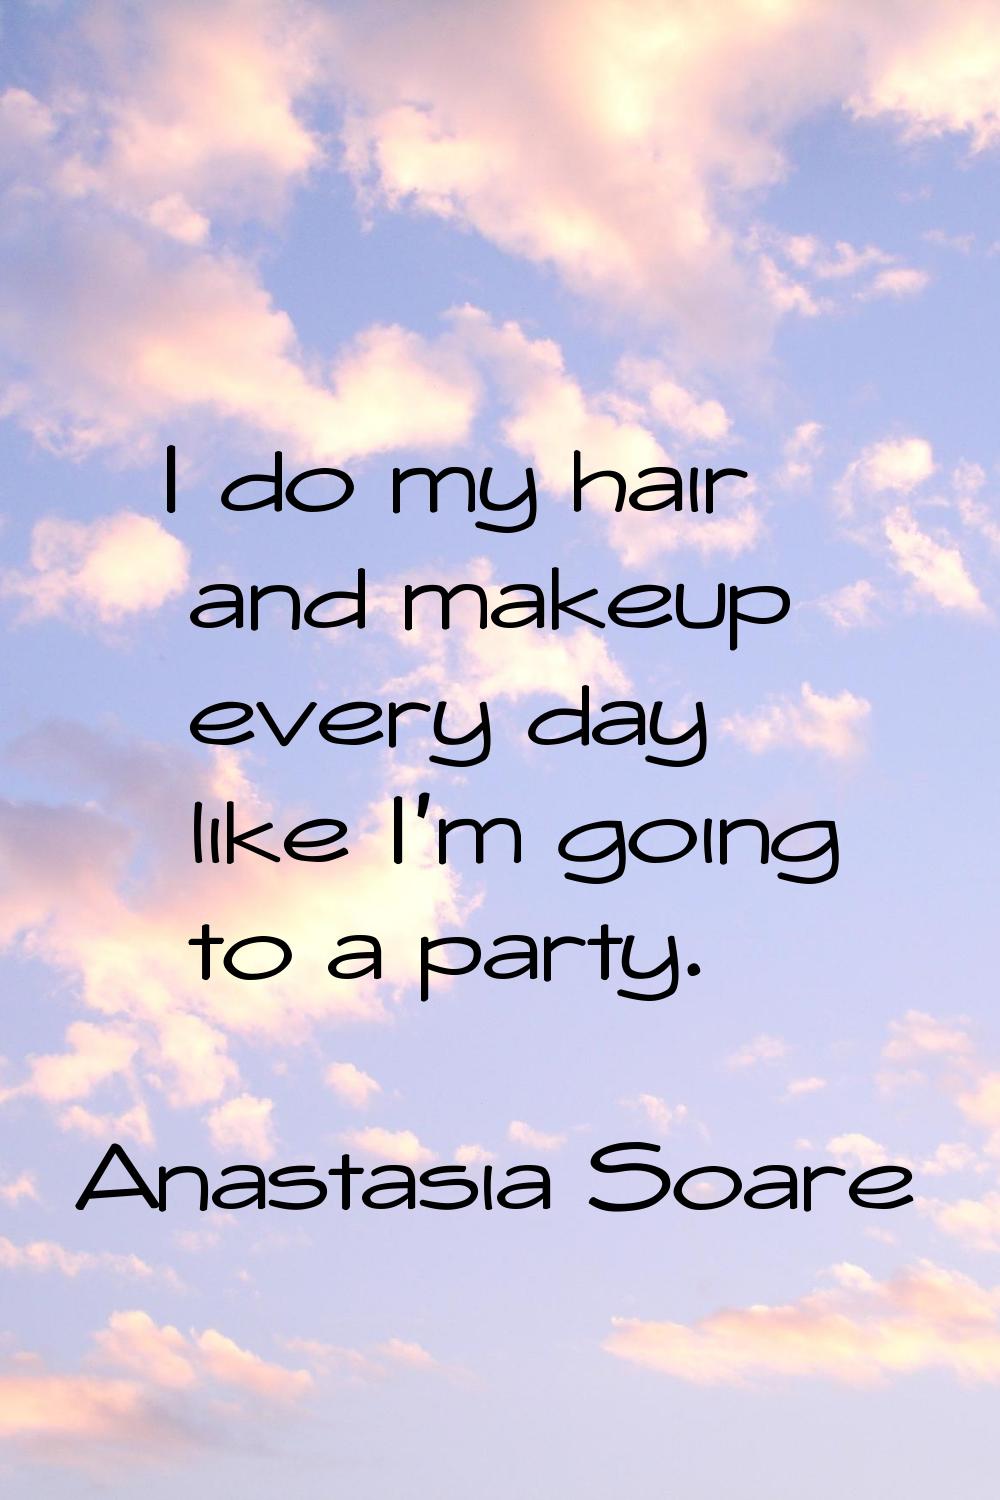 I do my hair and makeup every day like I'm going to a party.